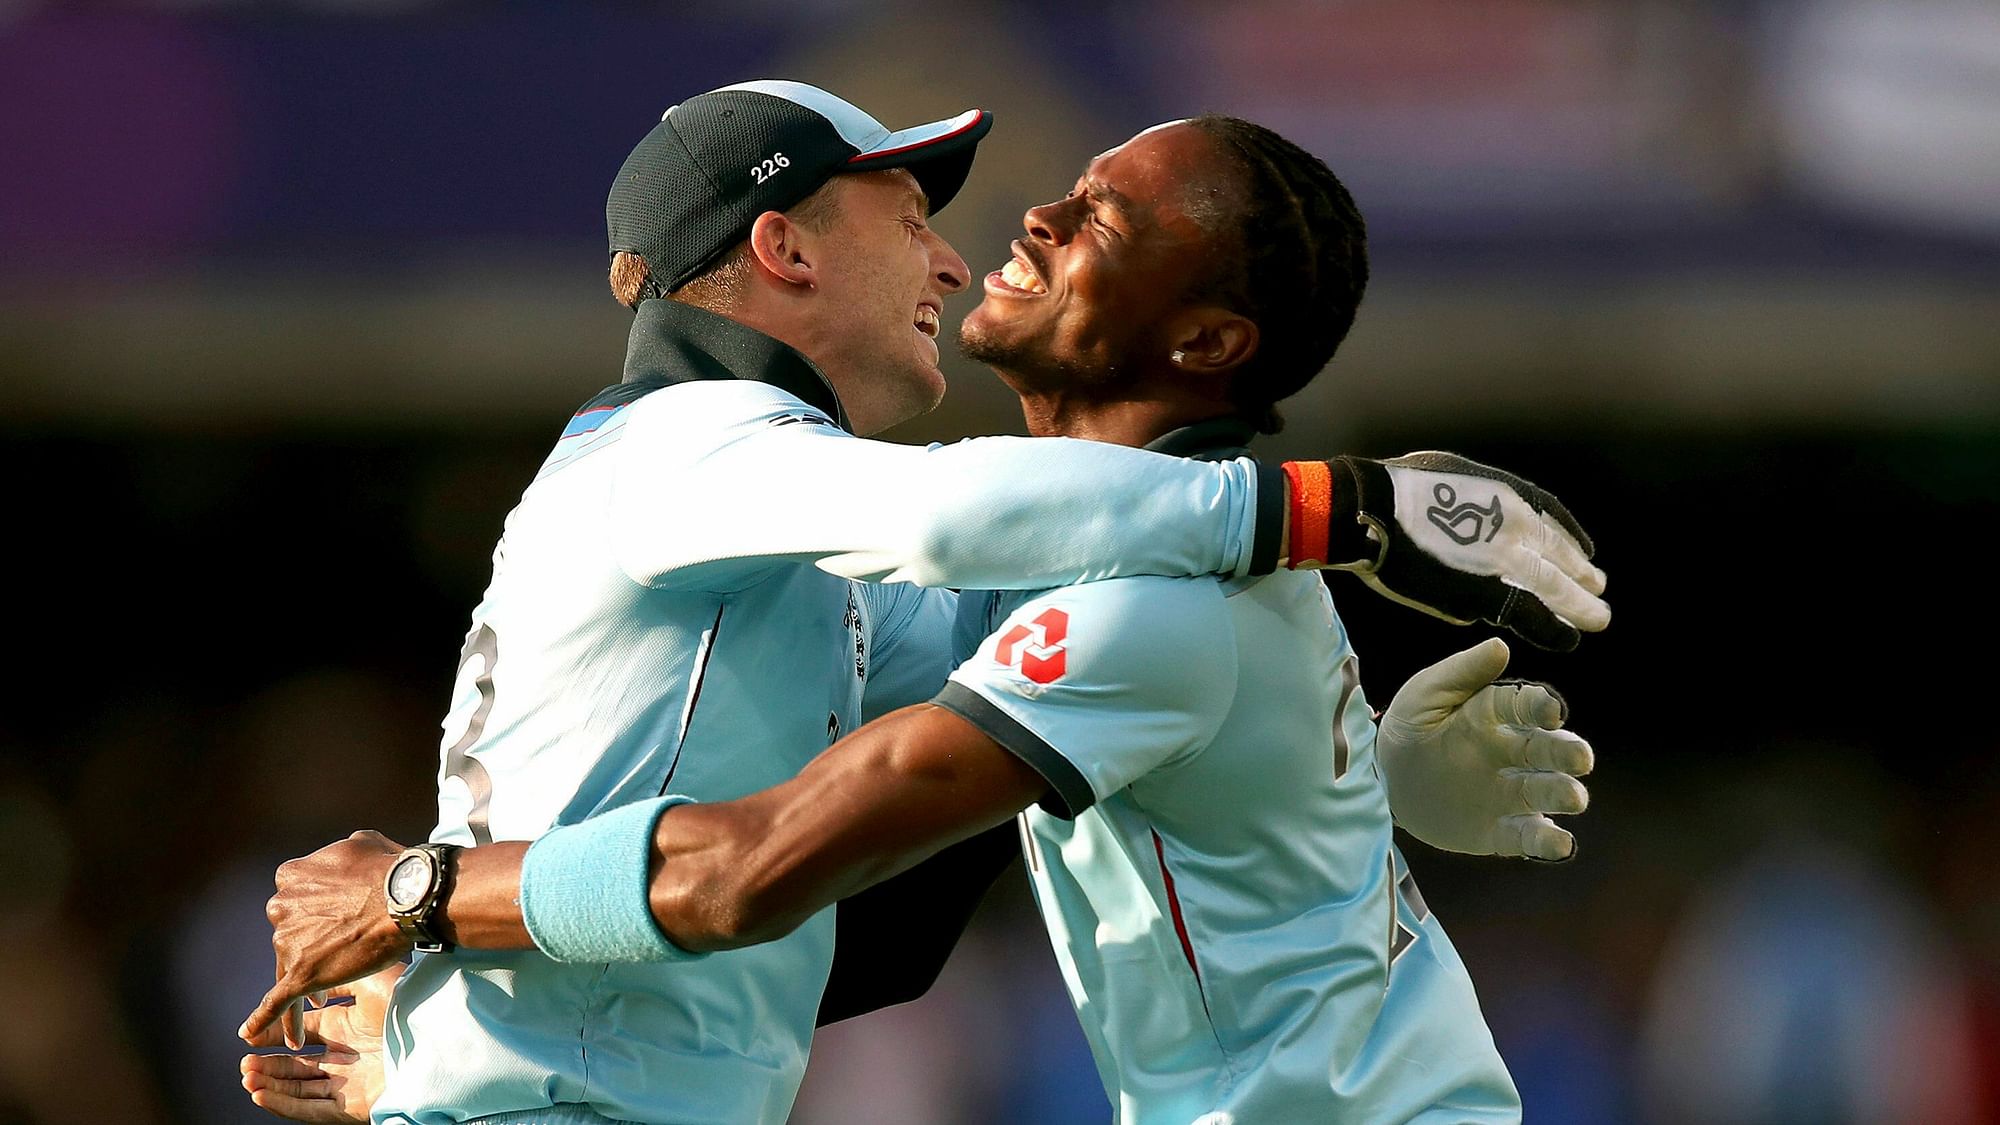 Born in Barbados, Jofra Archer qualified to play for England only this year.